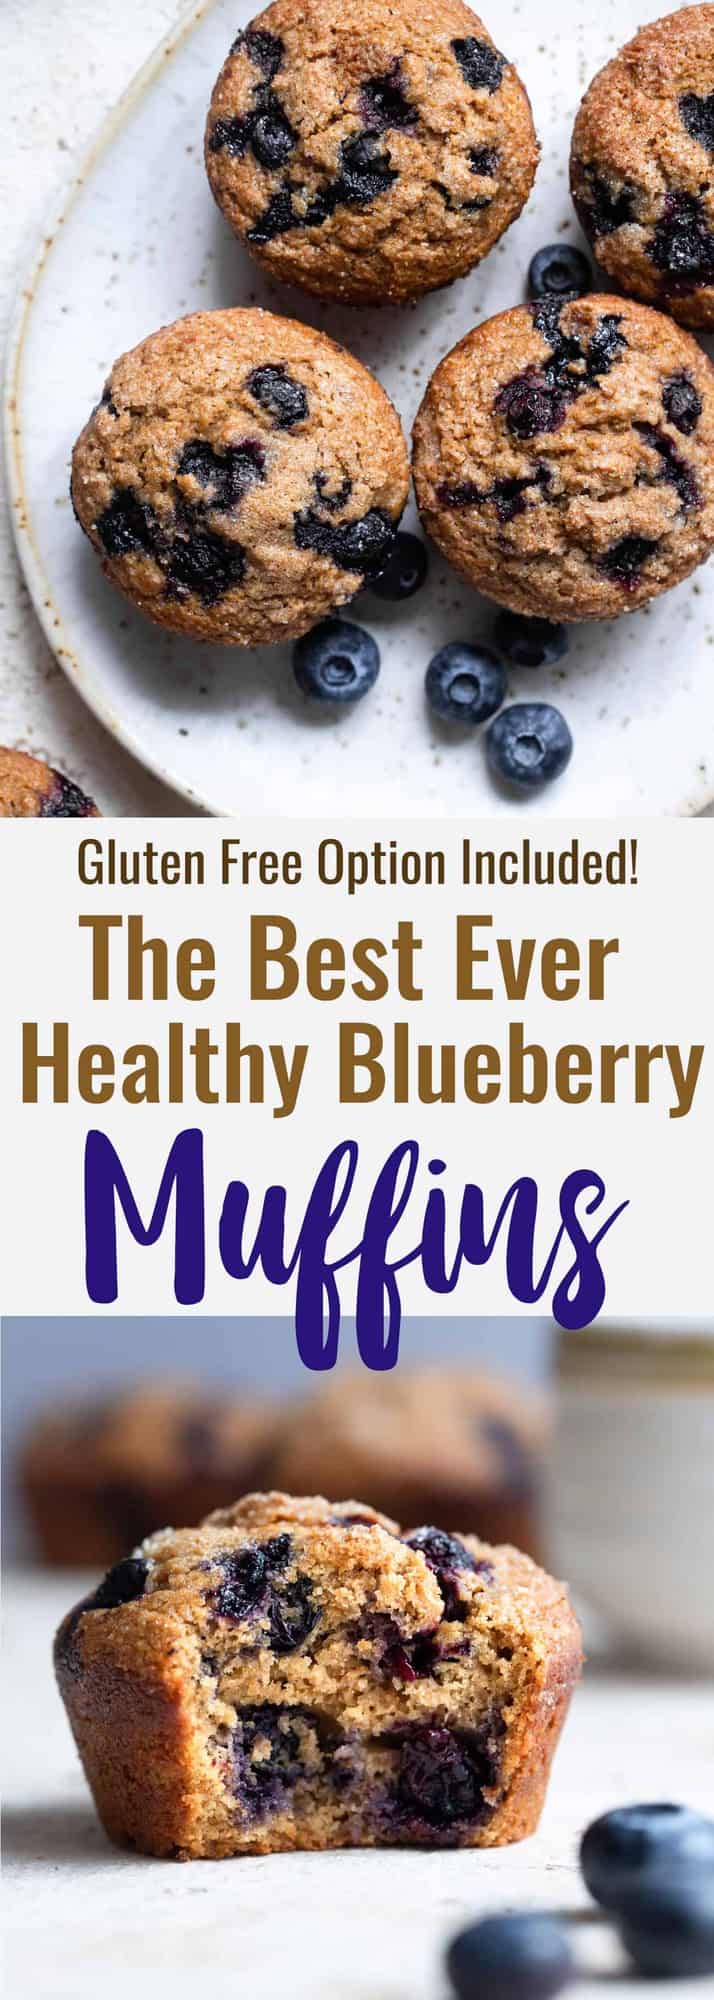 Healthy Whole Wheat Blueberry Muffins | Food Faith Fitness